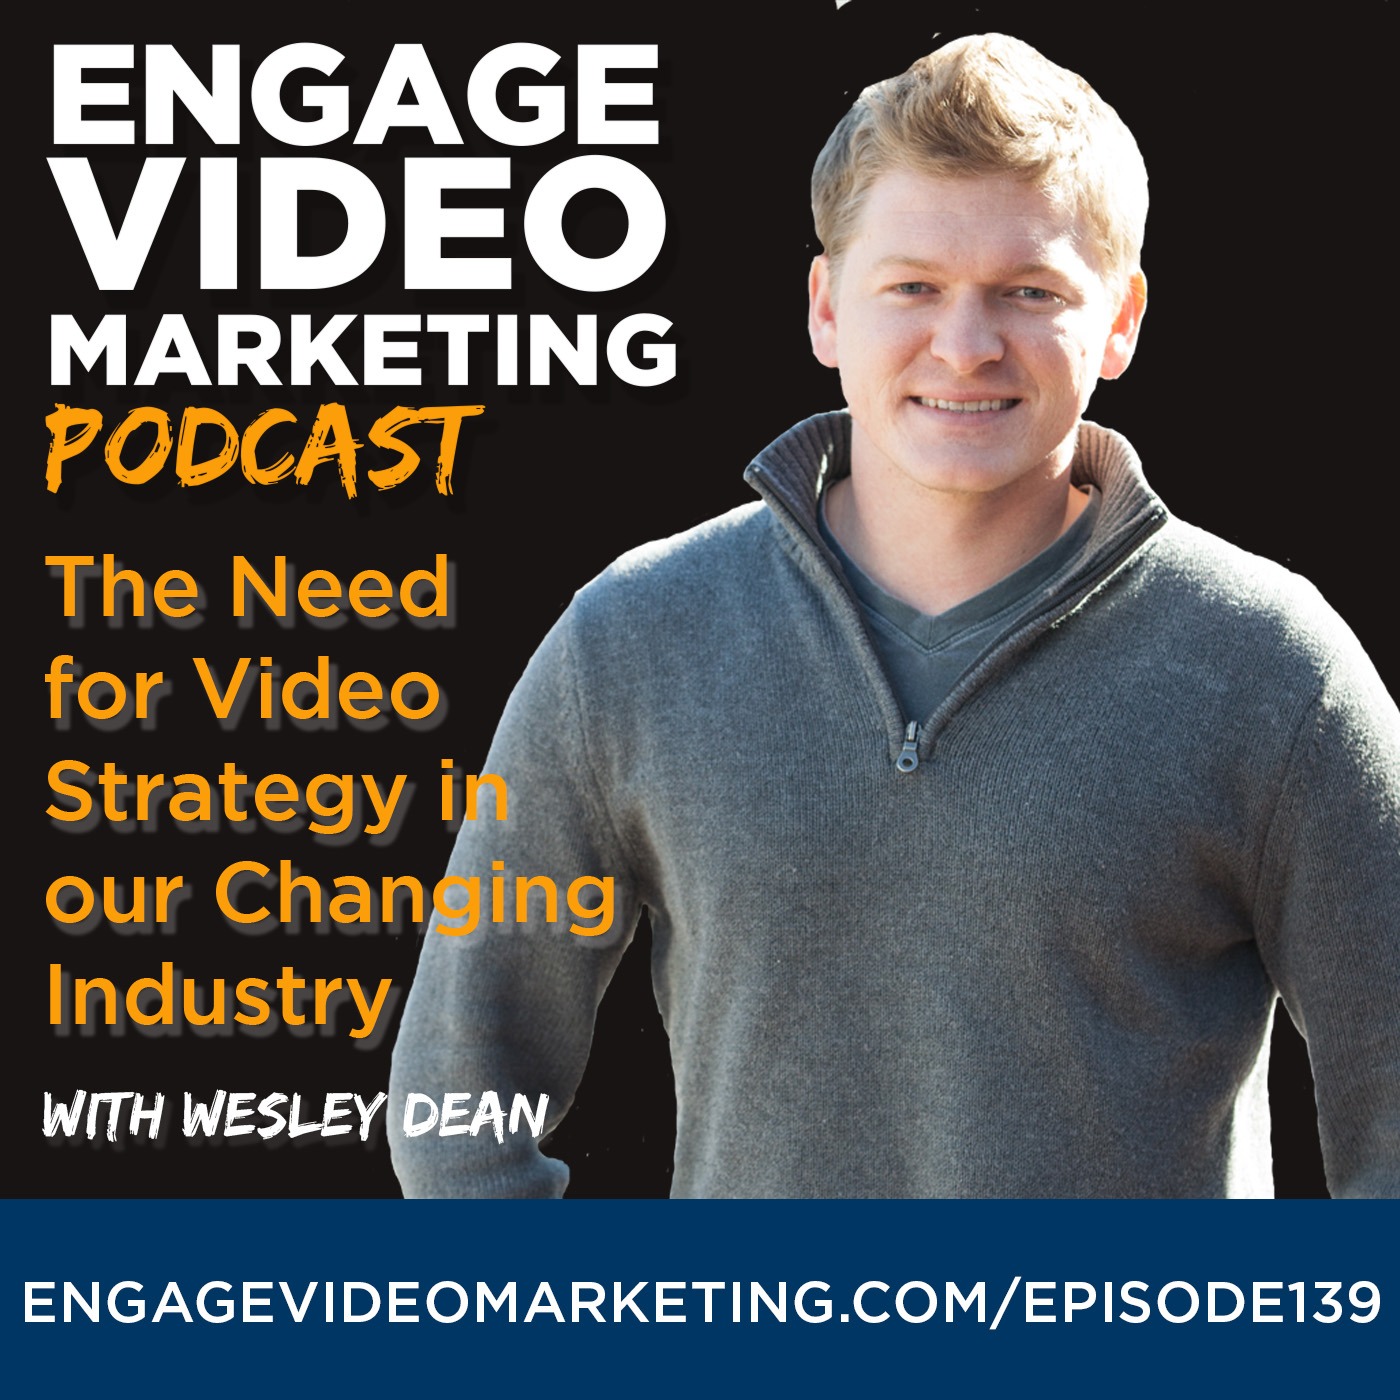 The Need for Video Strategy in our Changing Industry with Wesley Dean